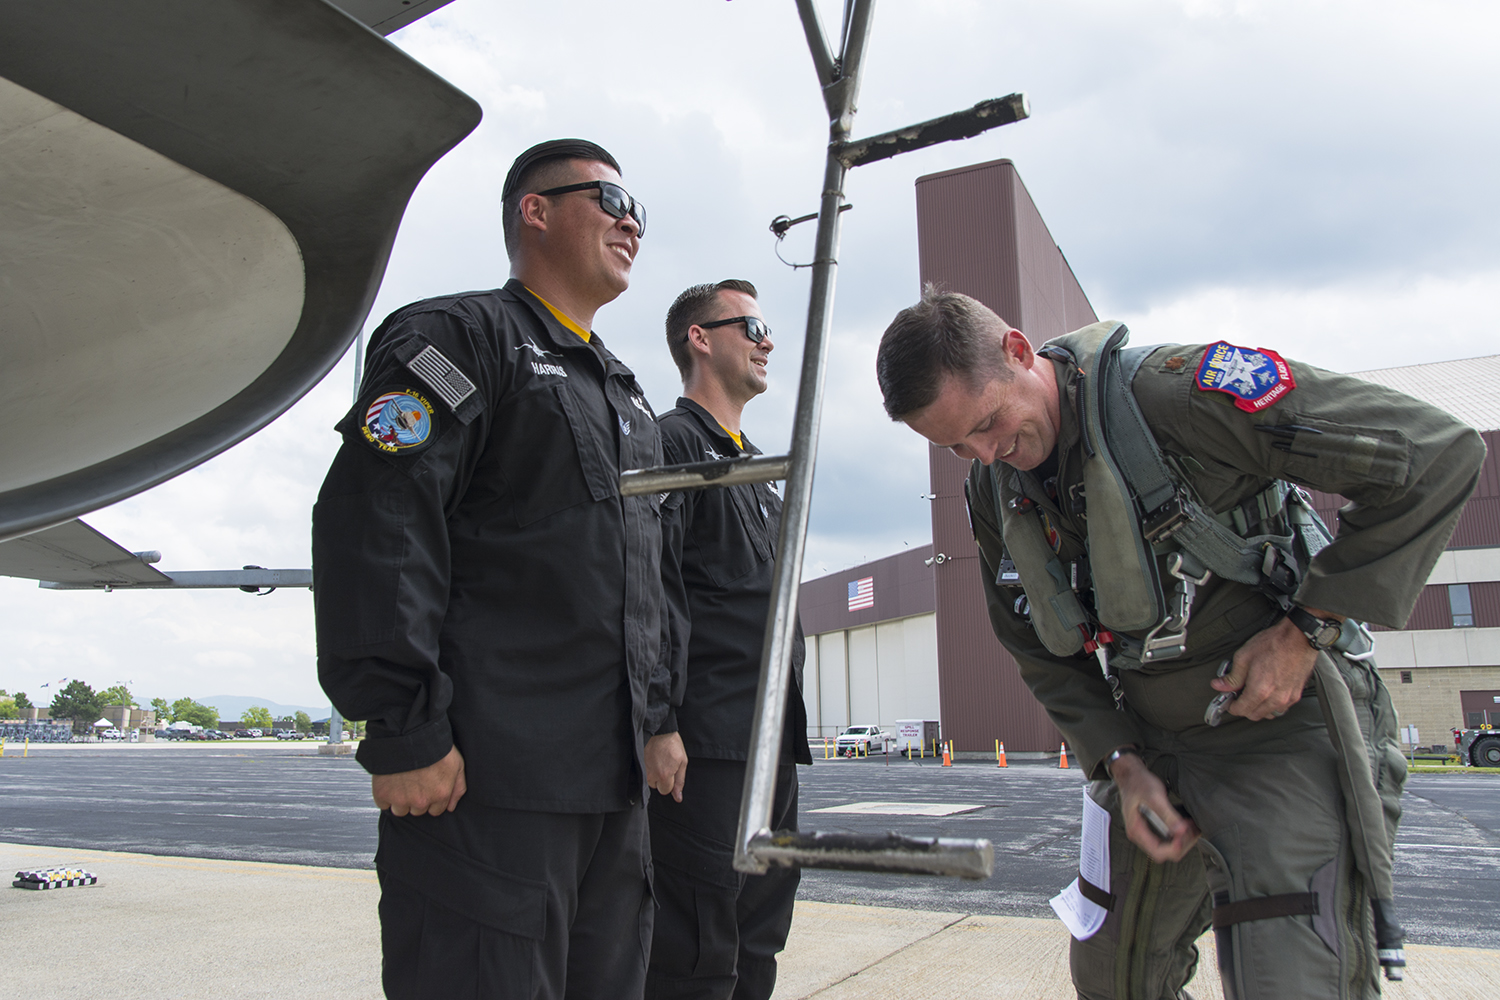 All smiles from SSgt. Billy Harris, left, and SSgt. Dominic Dizes, right, as Maj. John “Rain” Waters suits up.